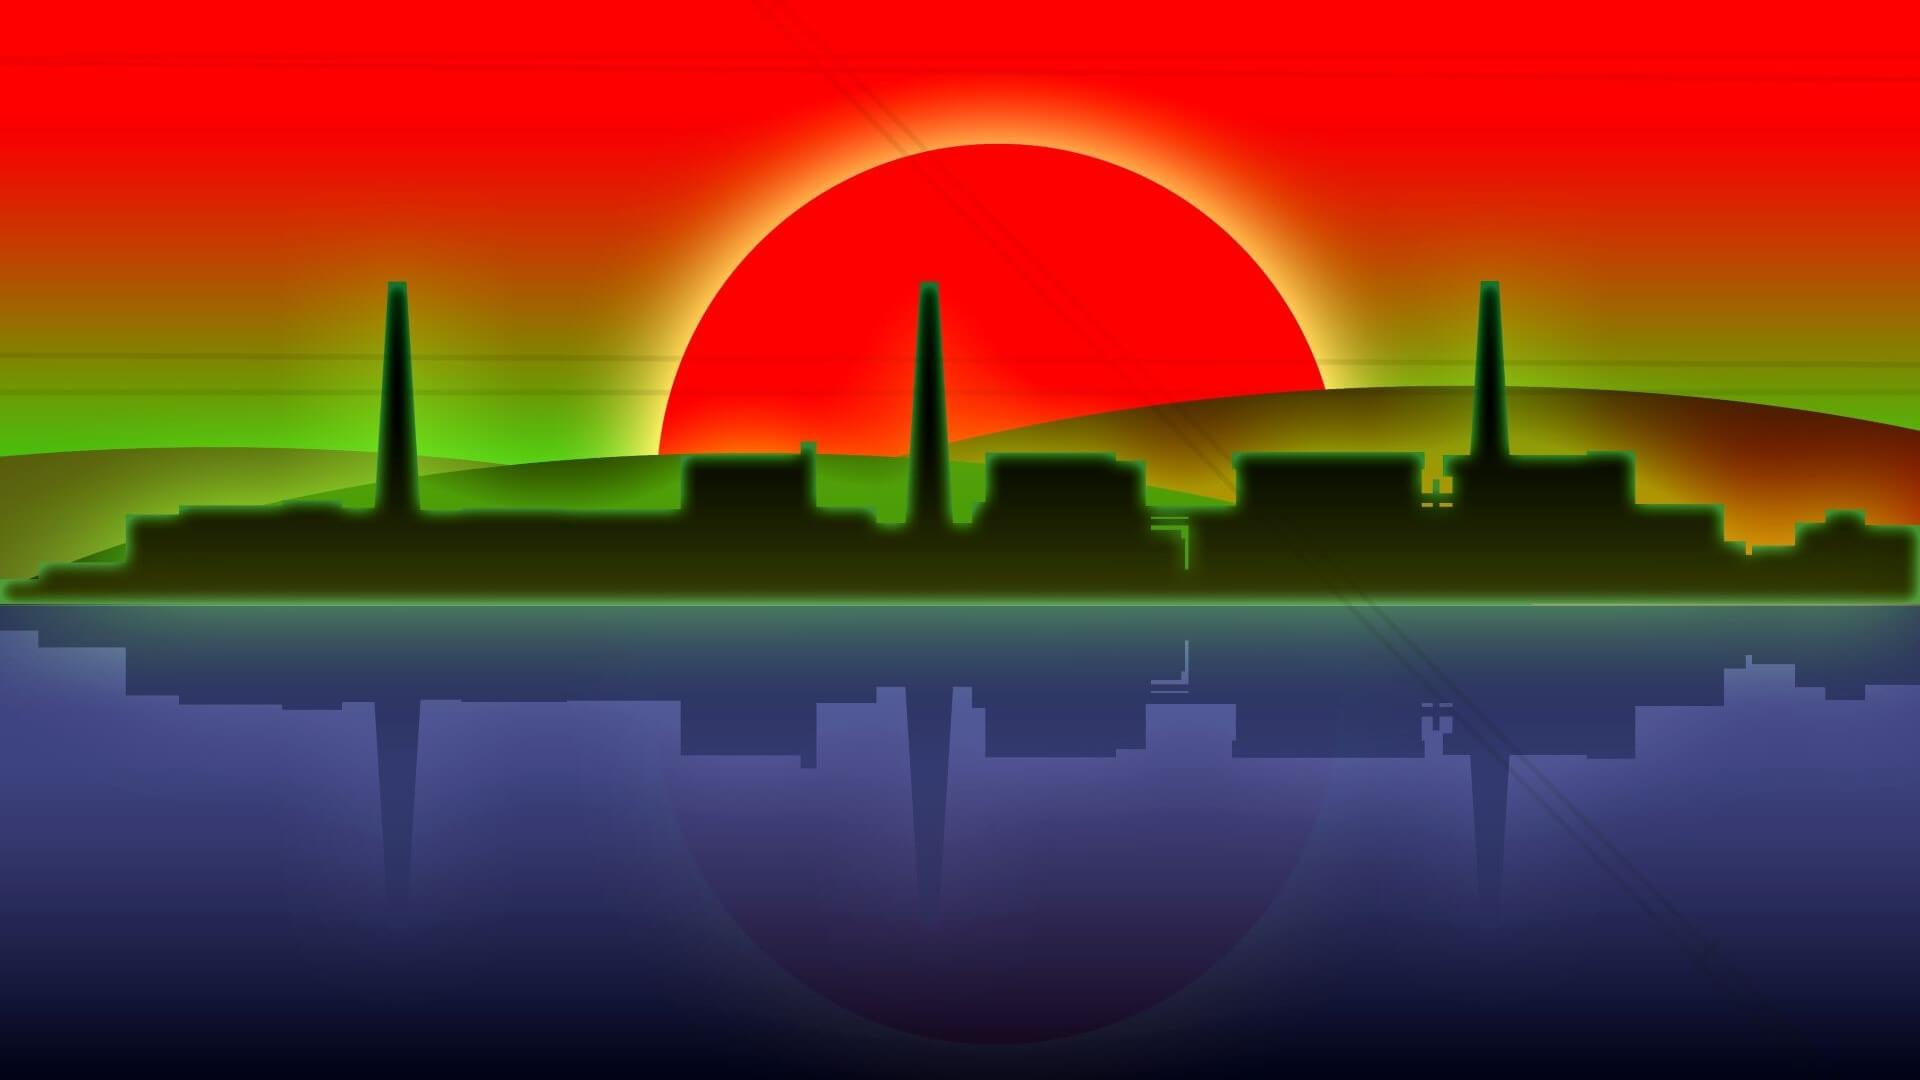 Stylised graphic of black industrial buildings silhouetted against red sun and sky and reflected in still, dark blue water